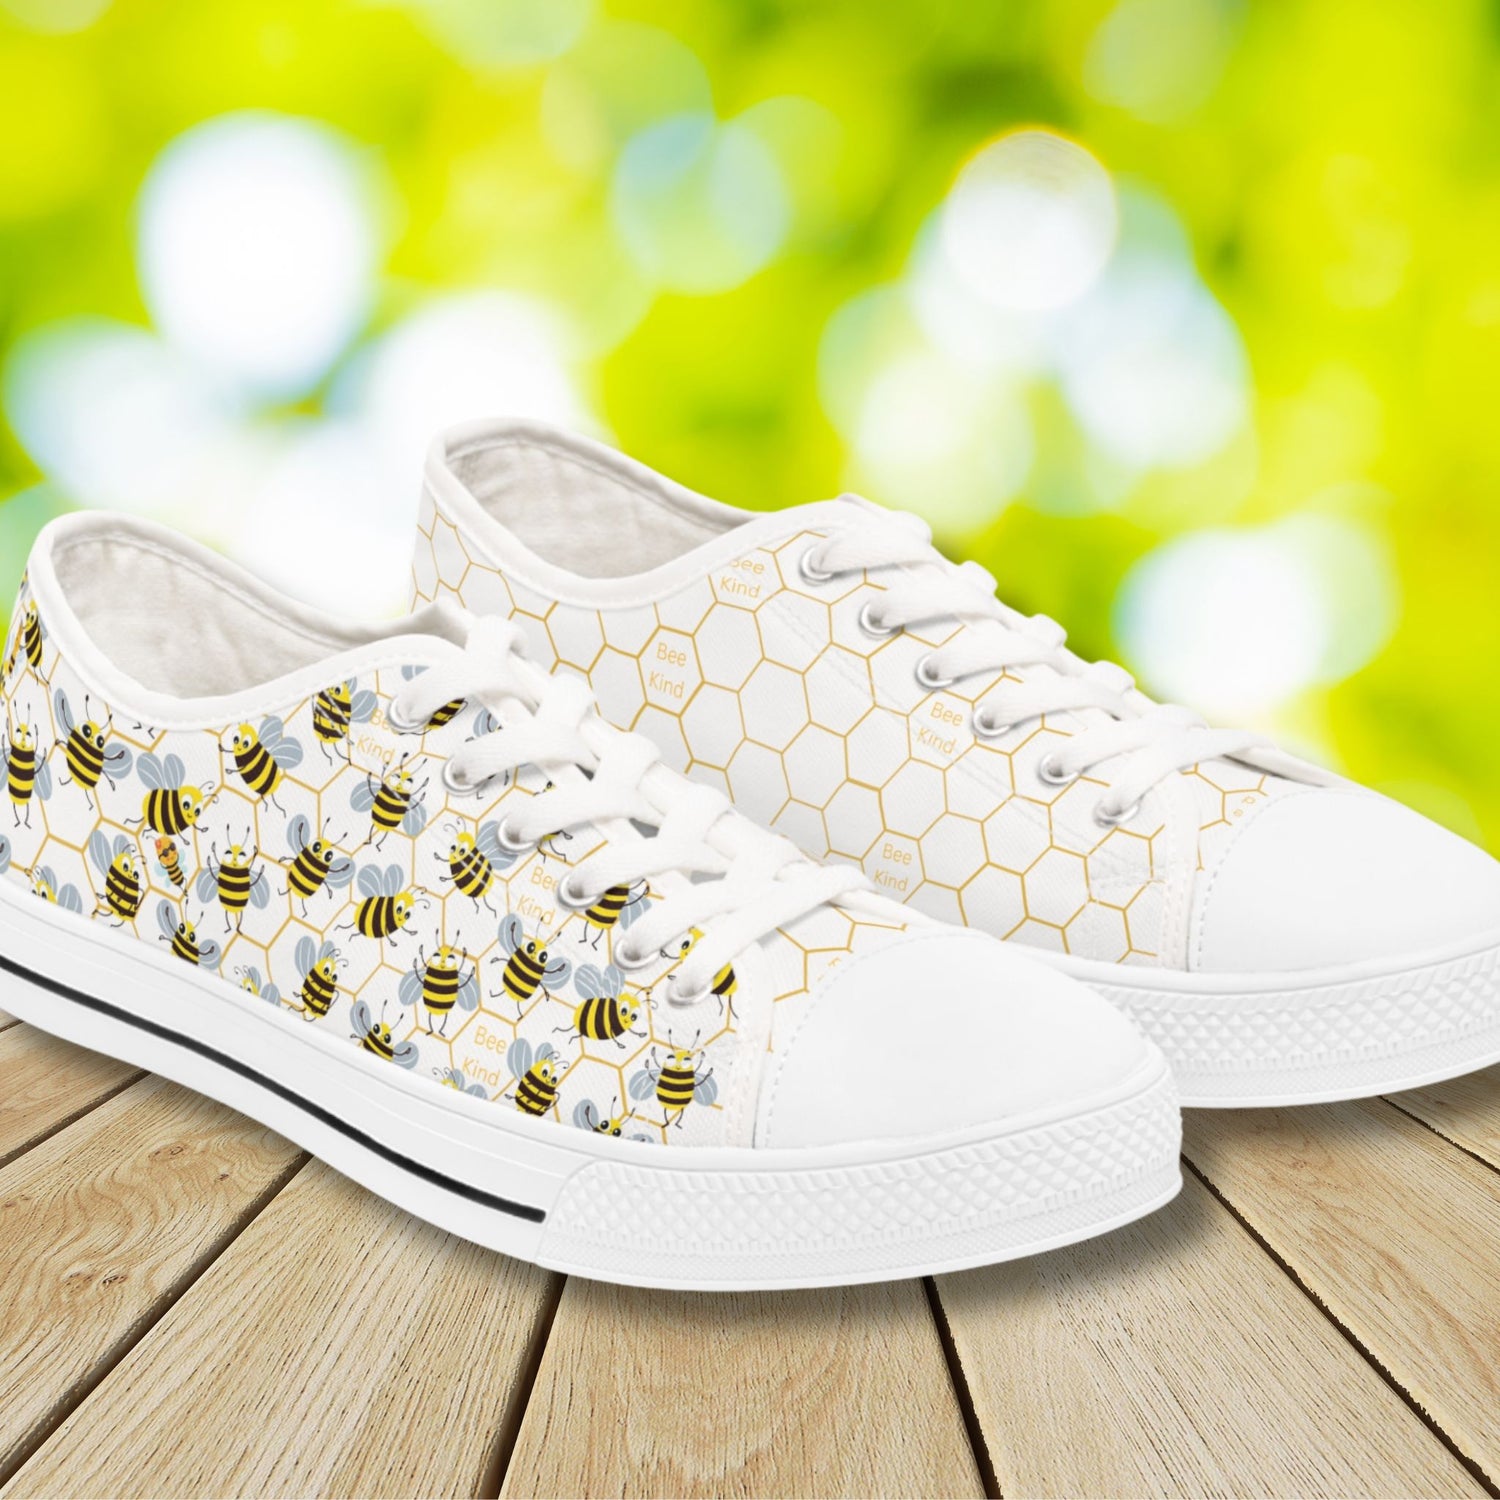 Cute Canvas Gardening inspired Sneakers